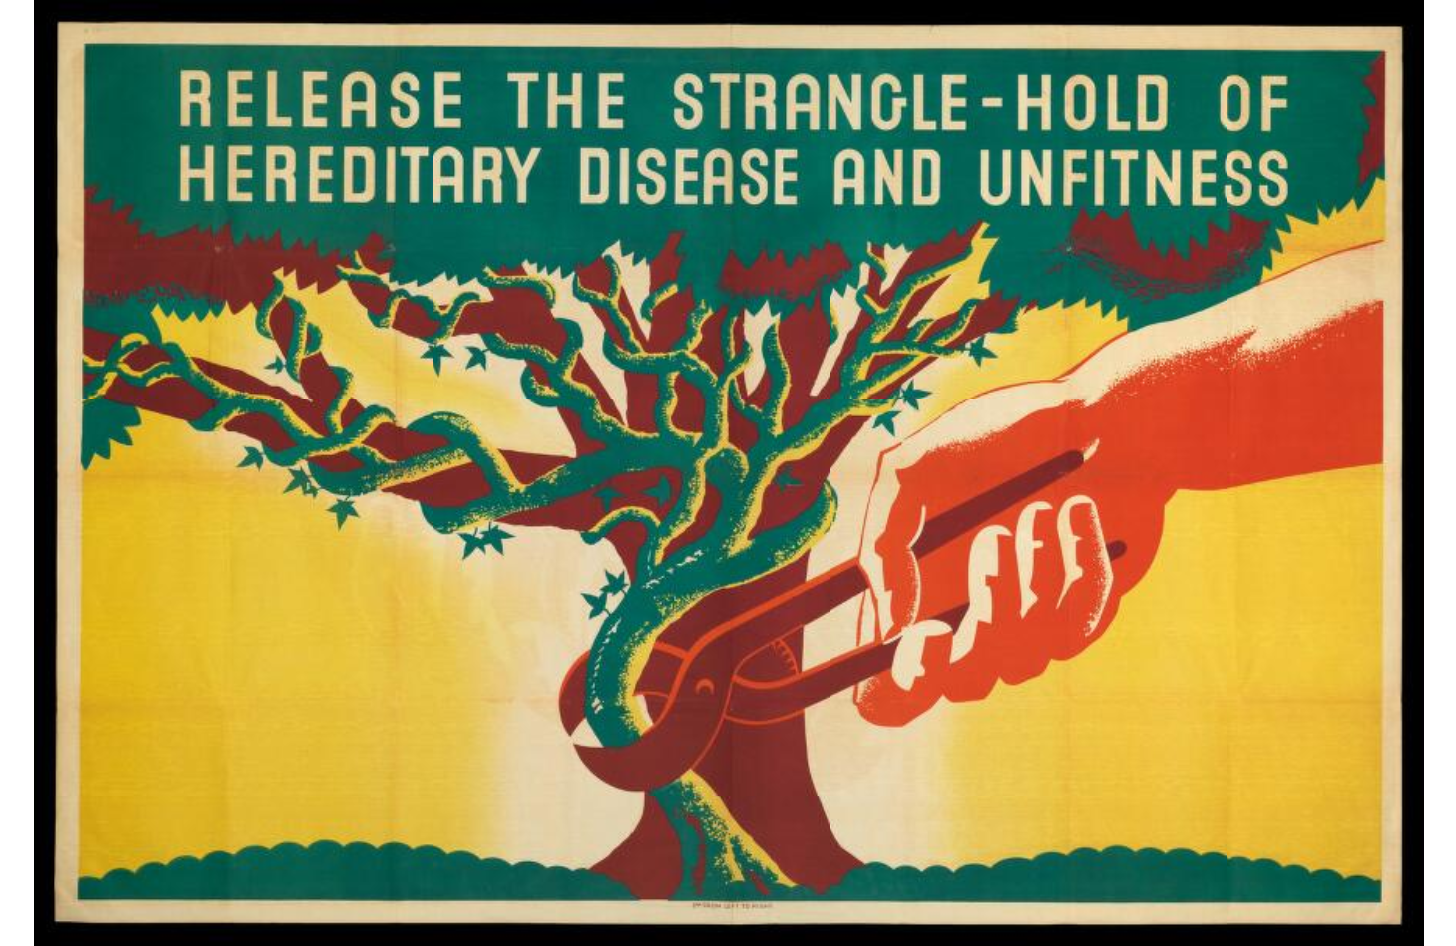 https://upload.wikimedia.org/wikipedia/commons/2/24/Eugenics_Society_Poster_%281930s%29.png